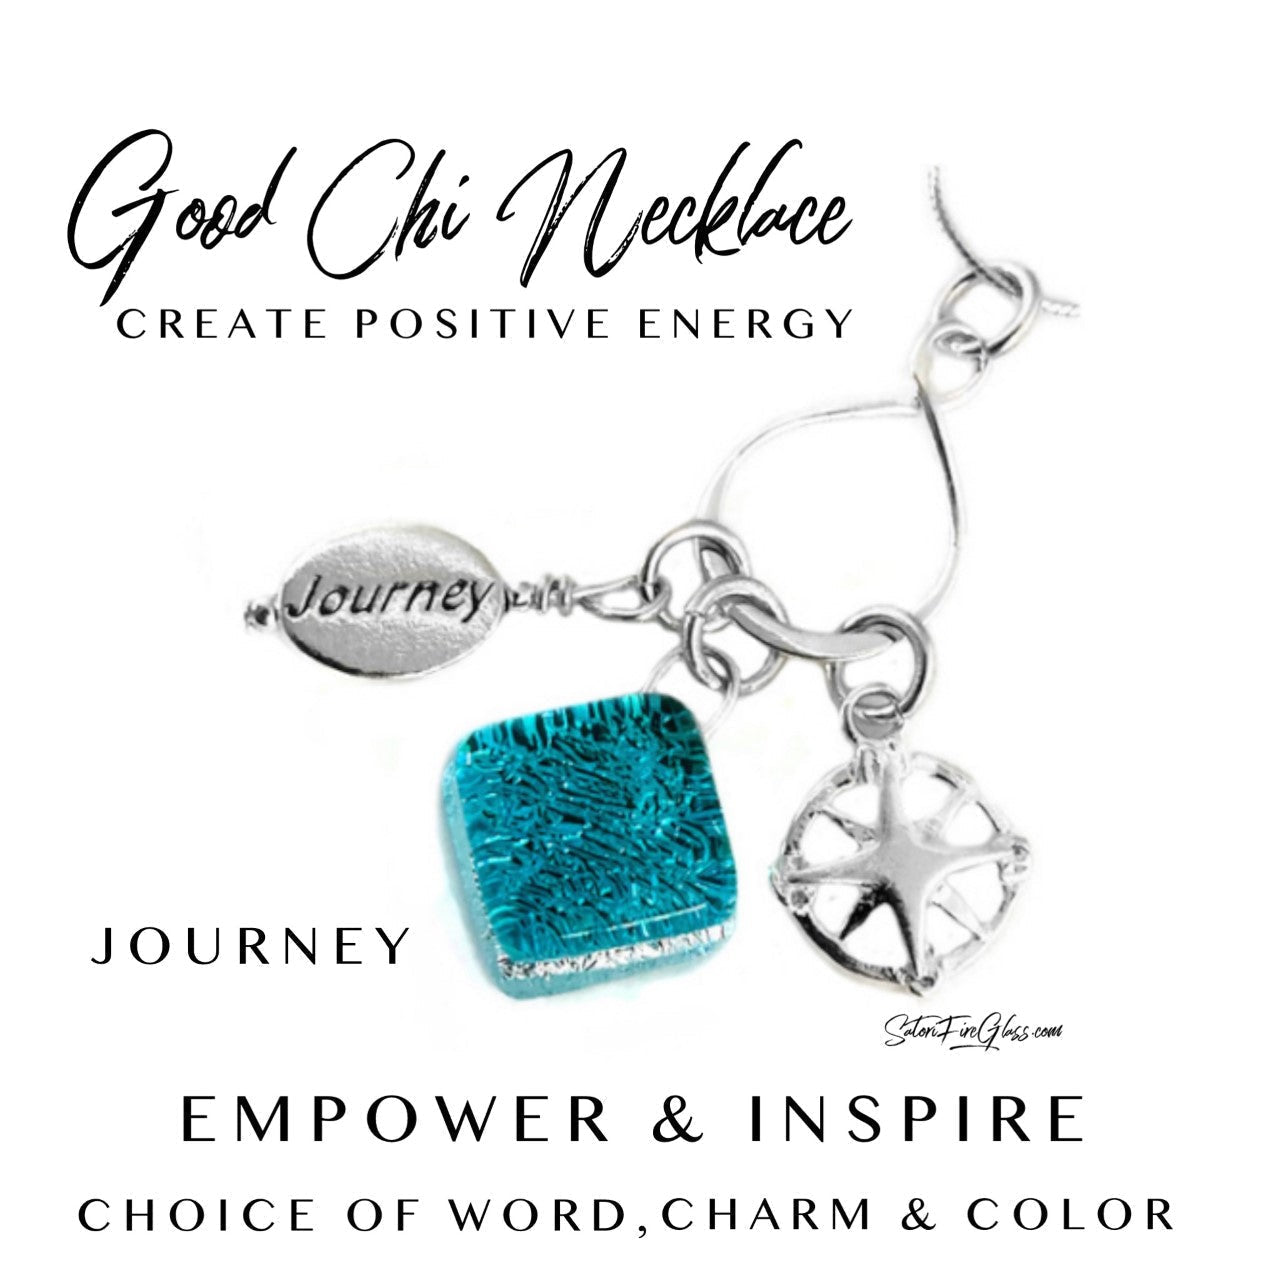 BEST SELLER Good Chi™ Charm Necklace for Positive Energy – Satori Fire Glass